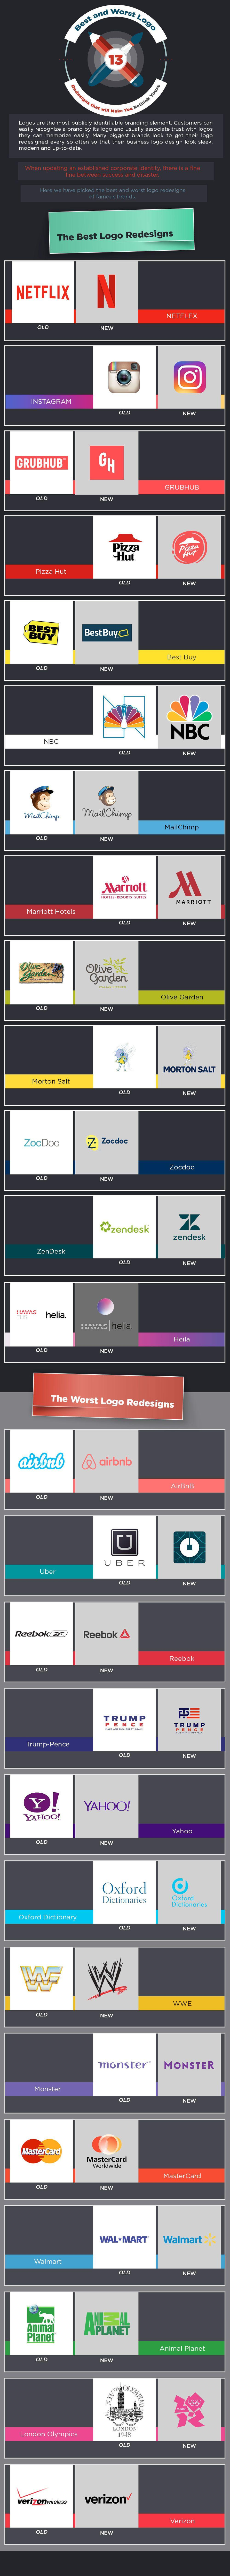 Best and Worst Logo - Some of The Best and Worst Logo Redesigns